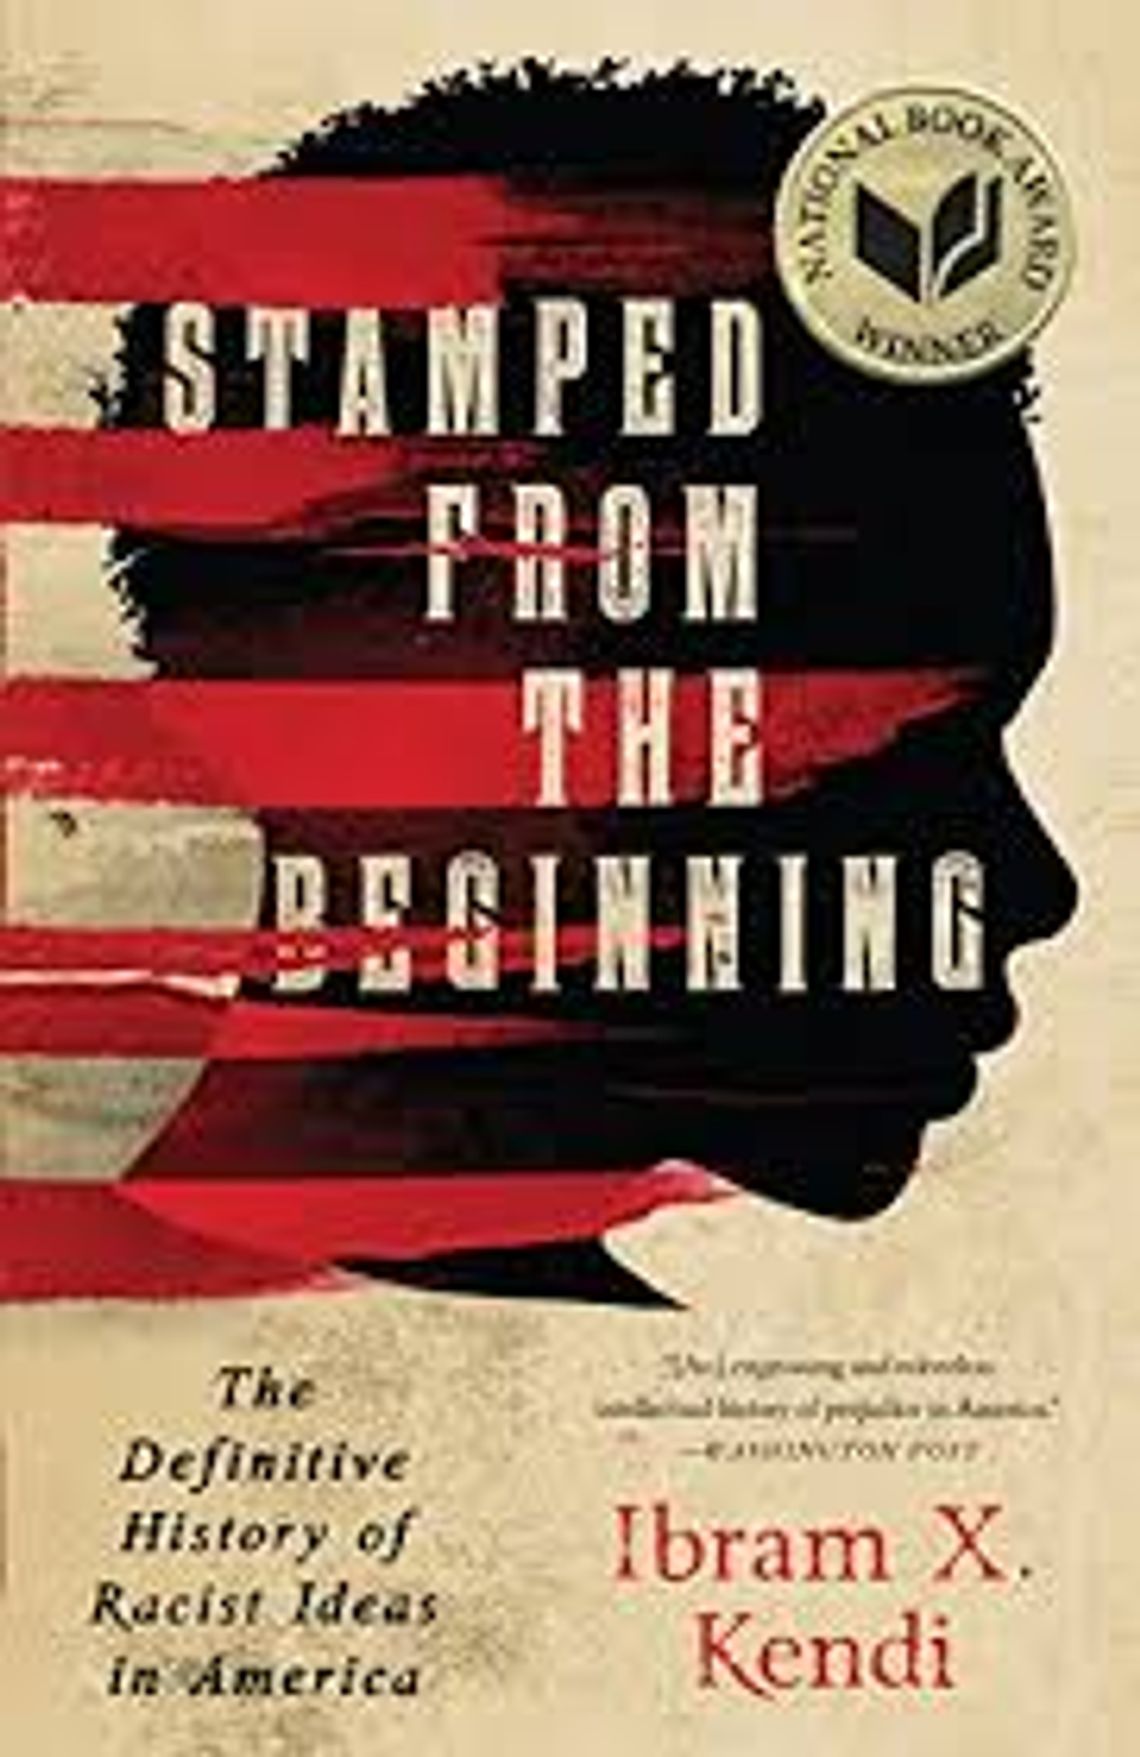 Book Review: Stamped From the Beginning